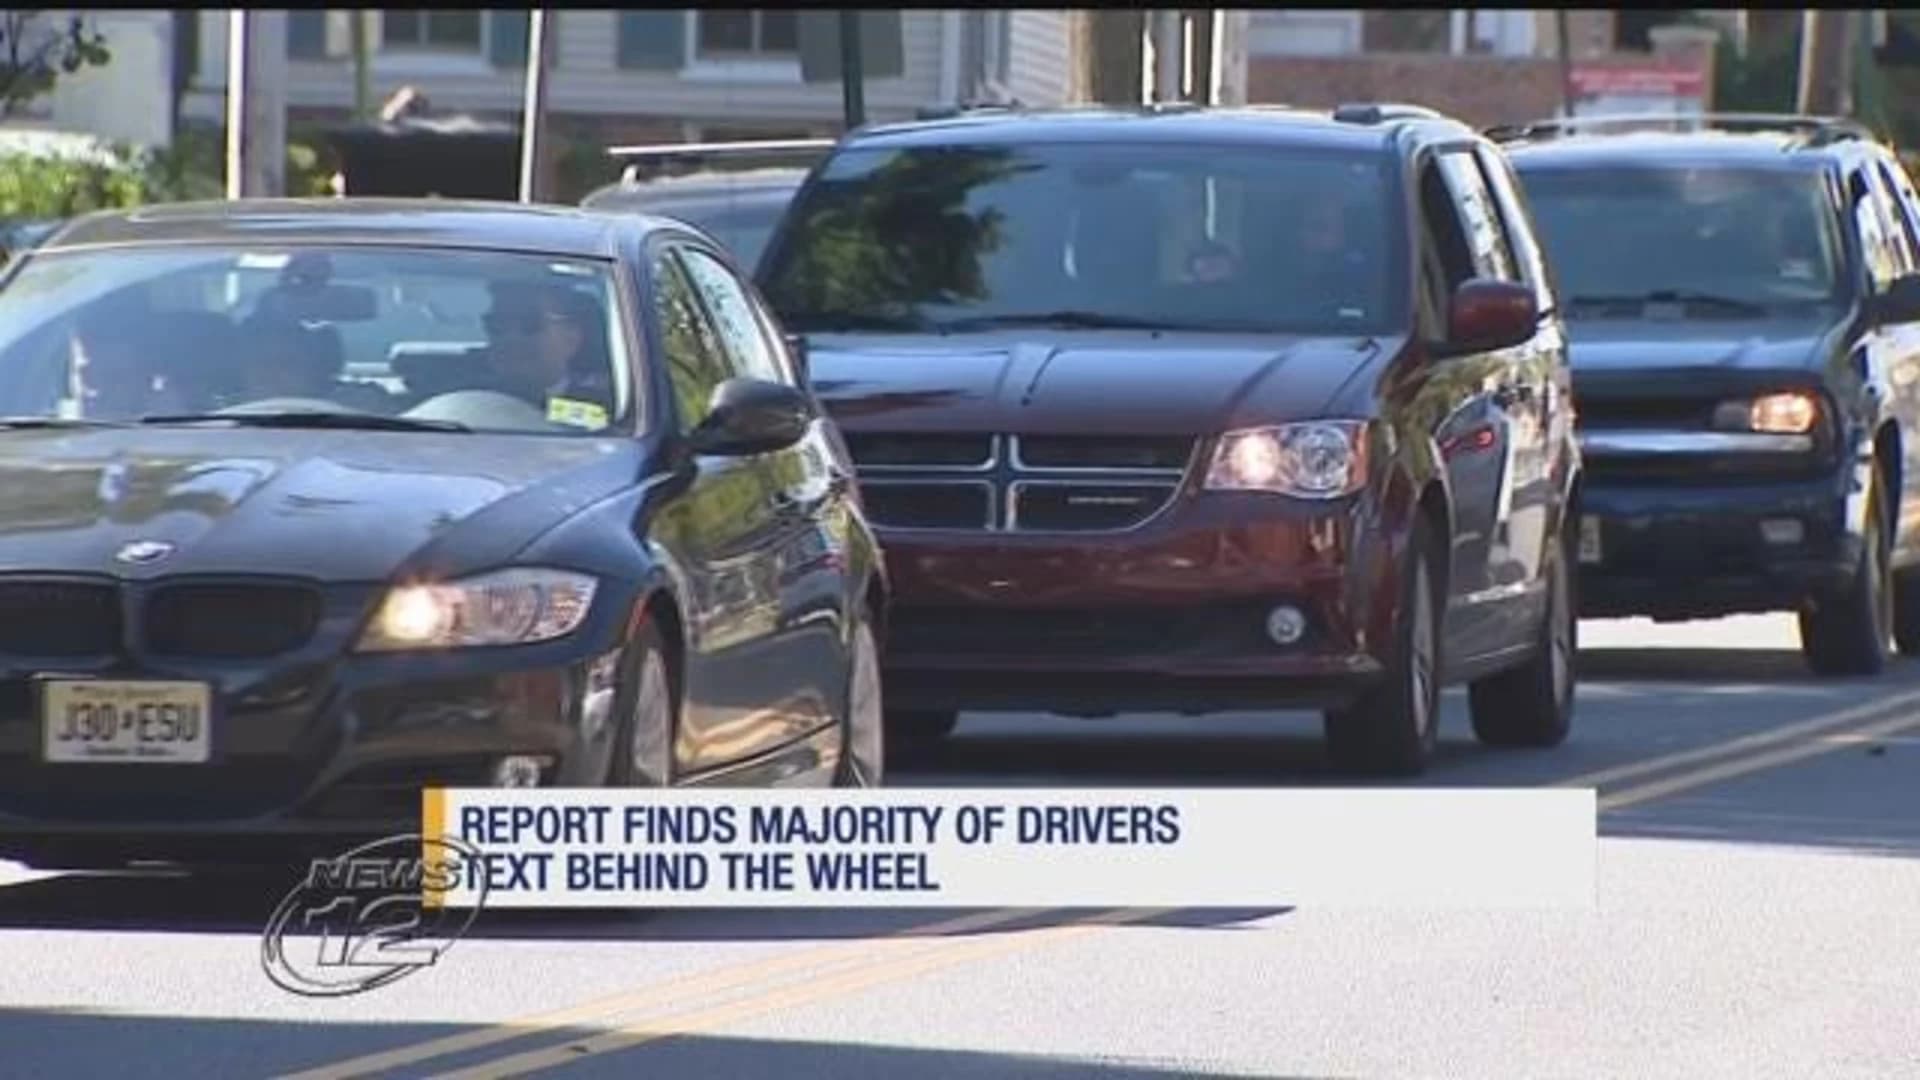 Survey: 54 percent of drivers admit to texting while driving